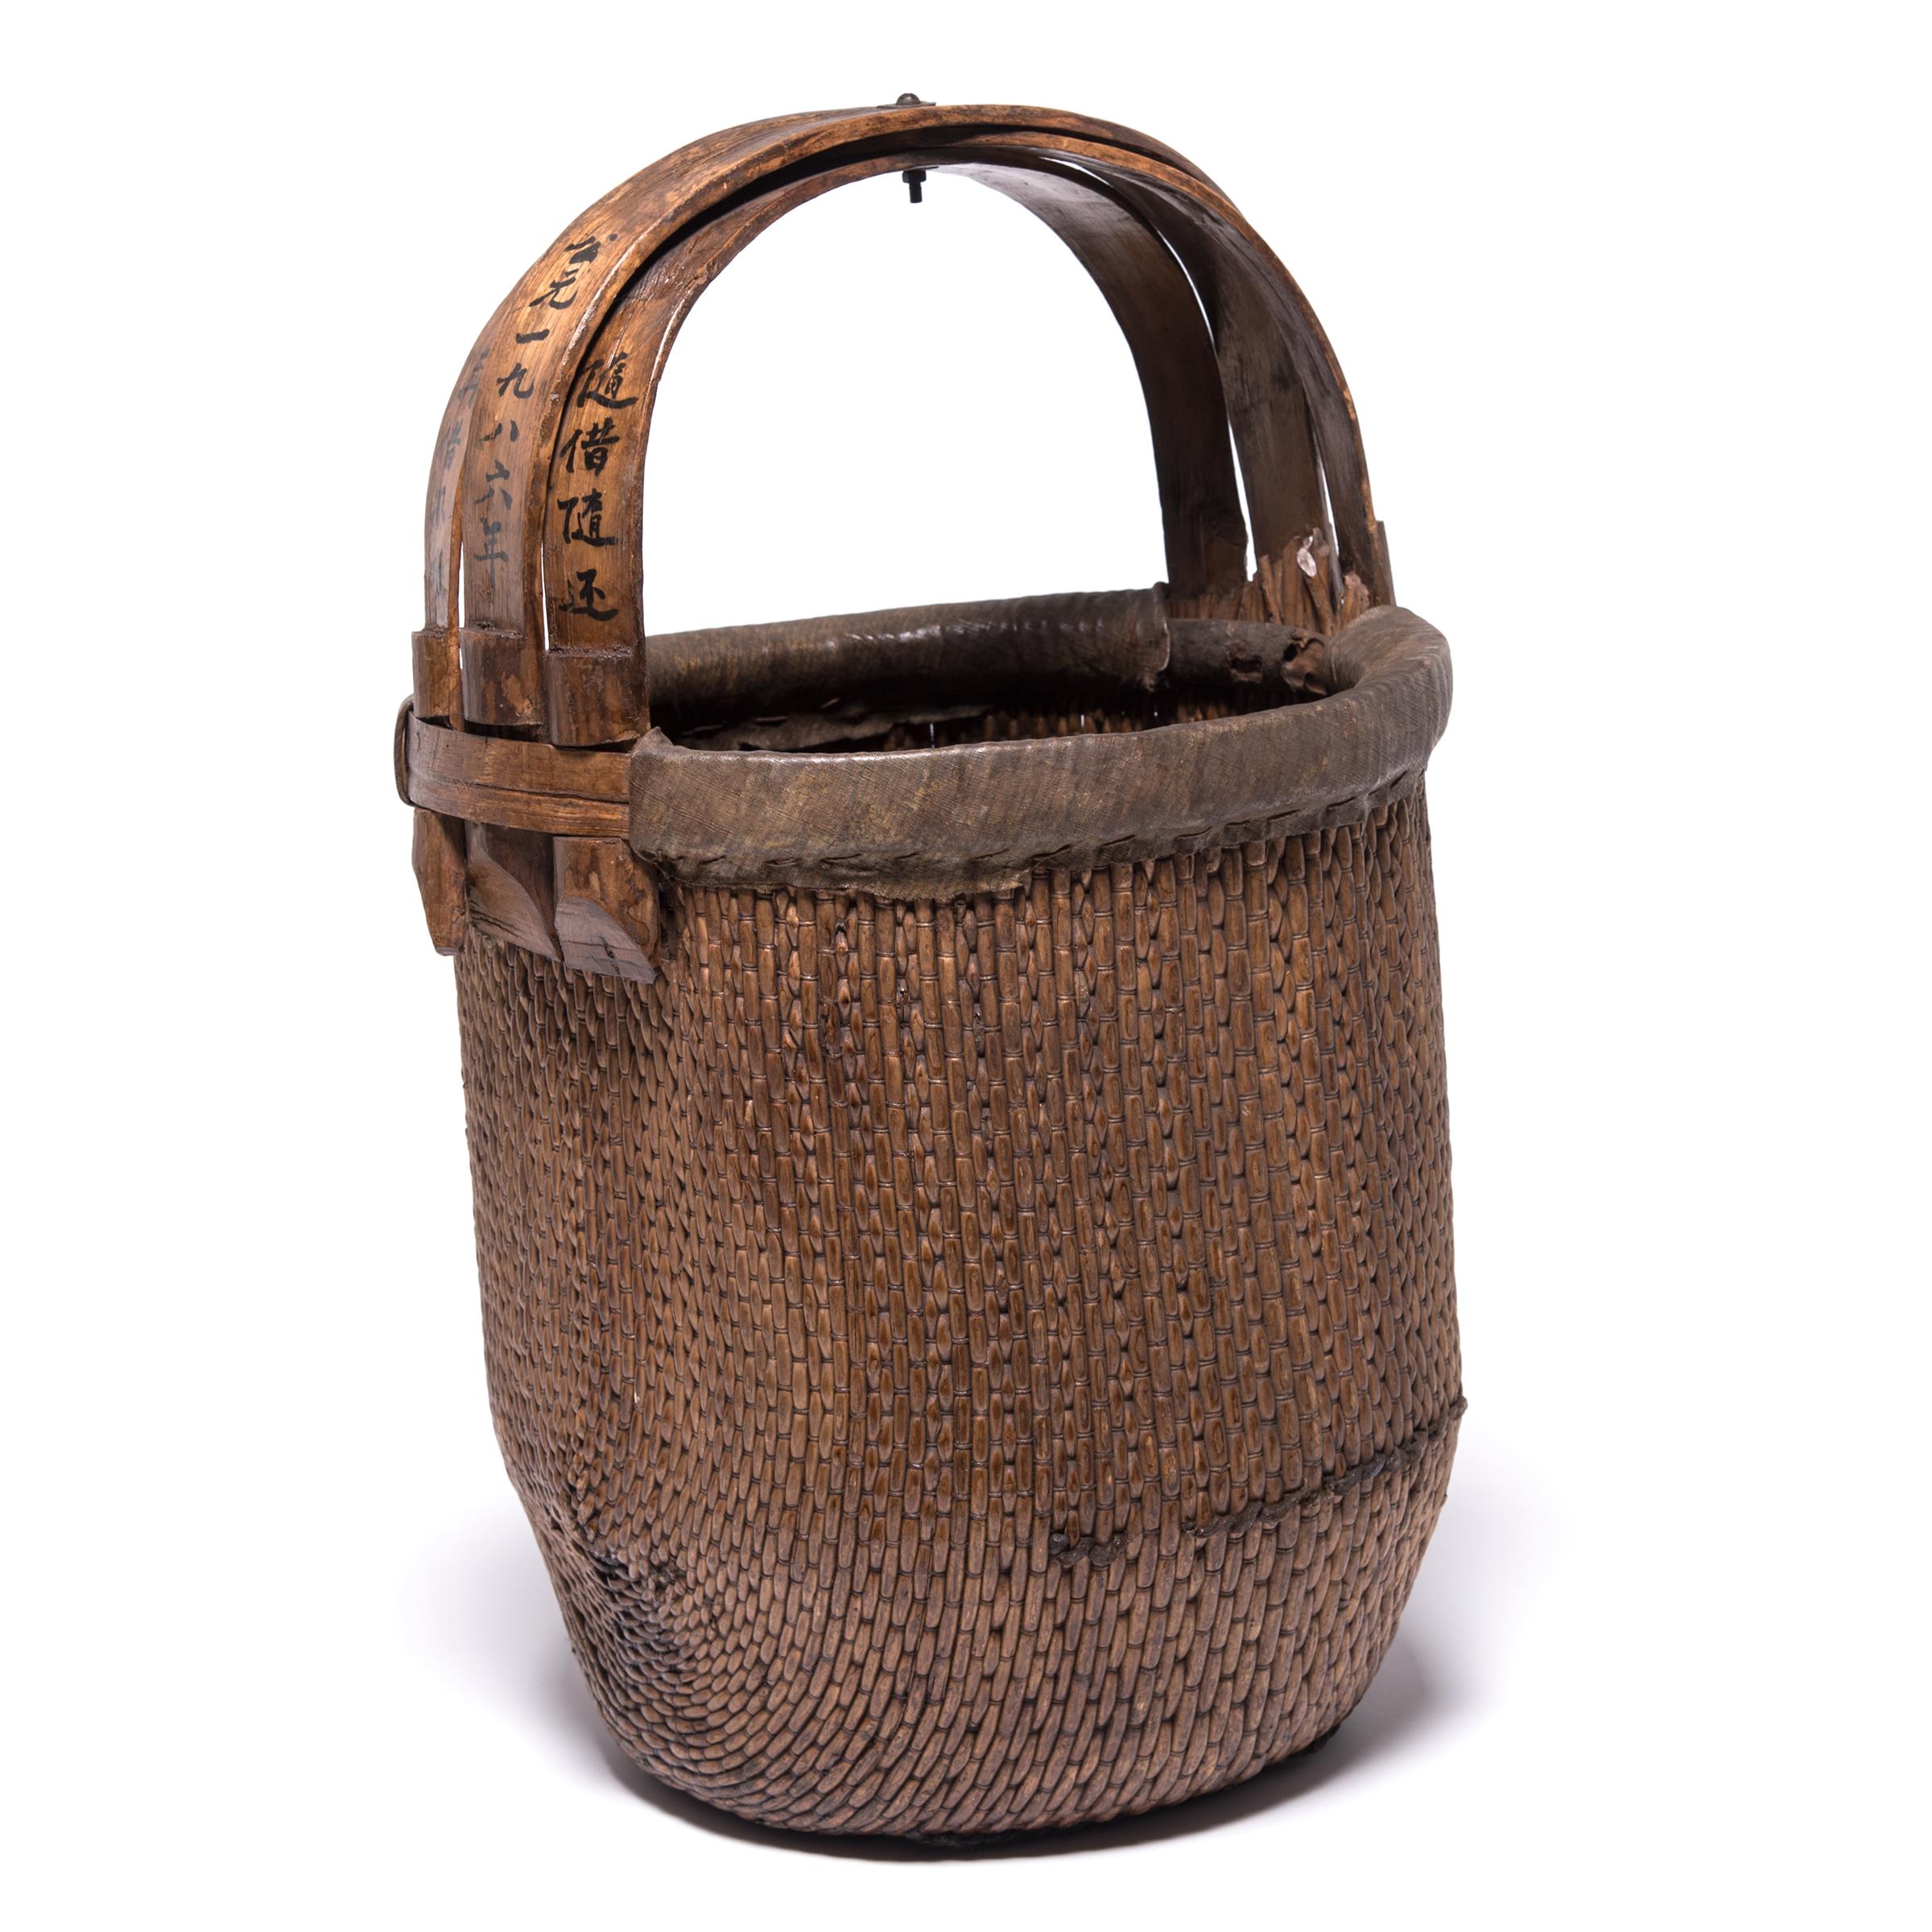 Basket making is an ancient and humble craft, but in the hands of a skilled weaver a simple willow basket can become a truly beautiful work of art. This bent handle basket was made in China long ago, and the artisan’s mastery is evident: the strong,